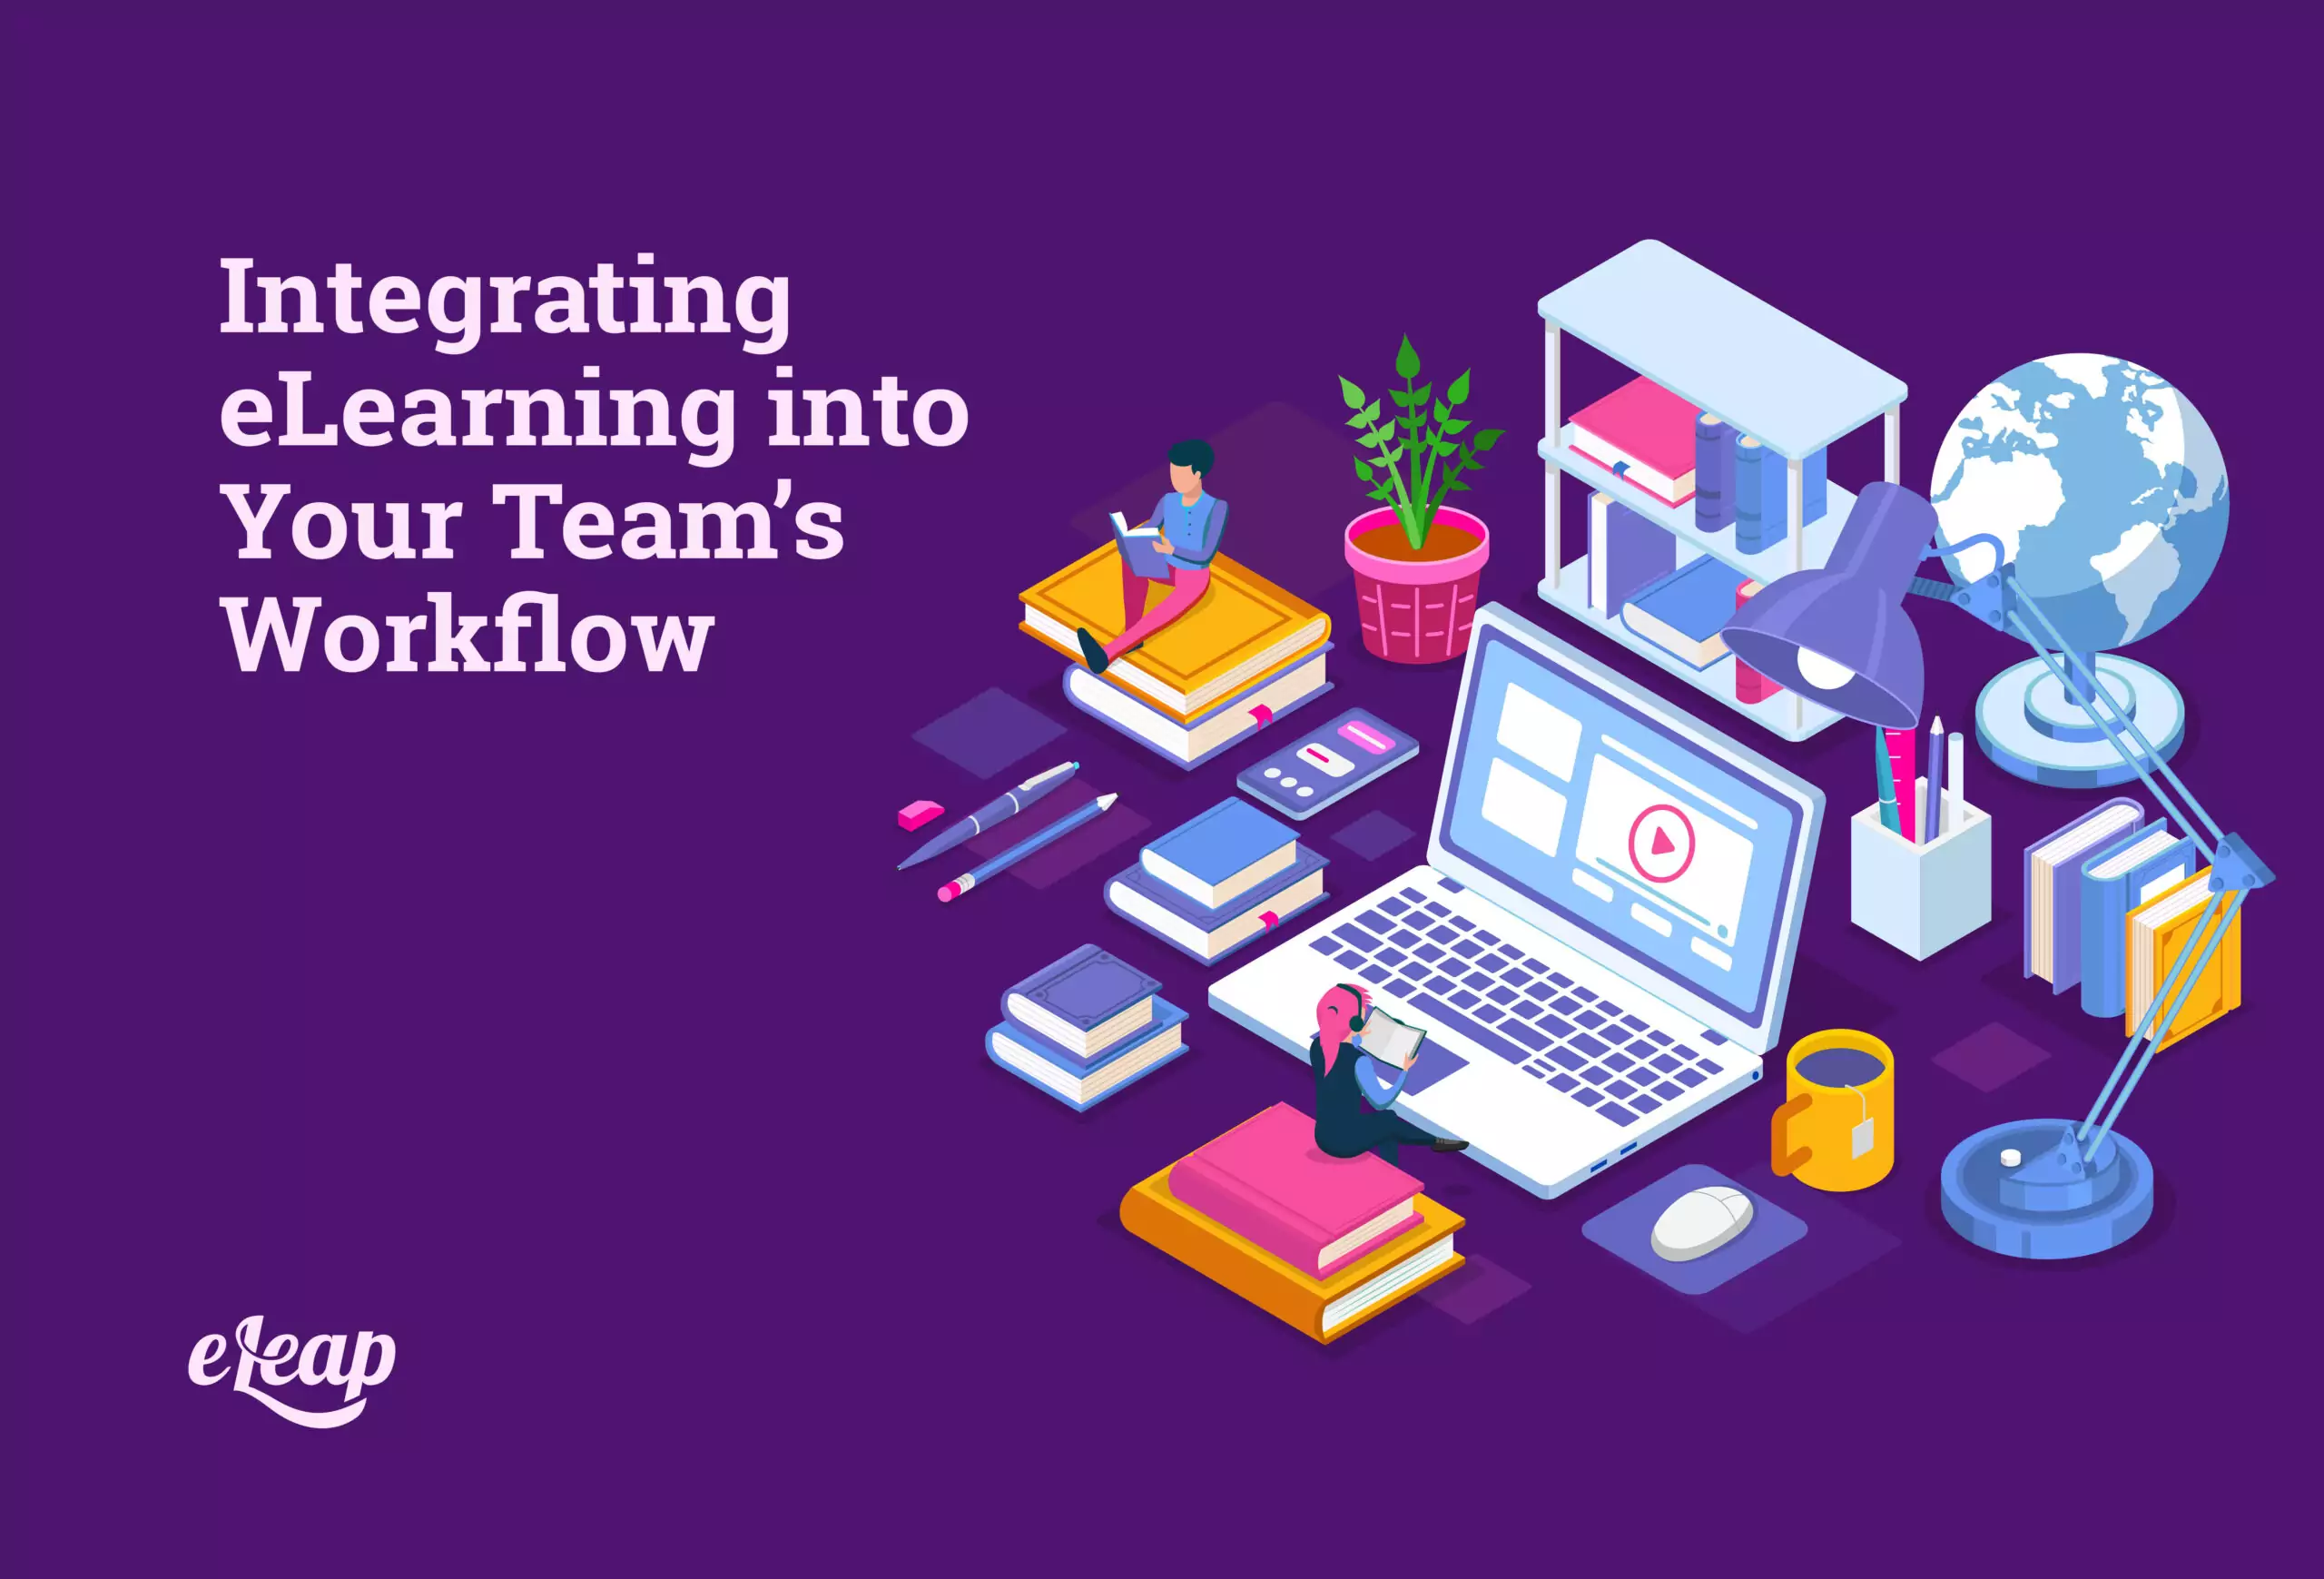 Integrating eLearning into Your Team’s Workflow